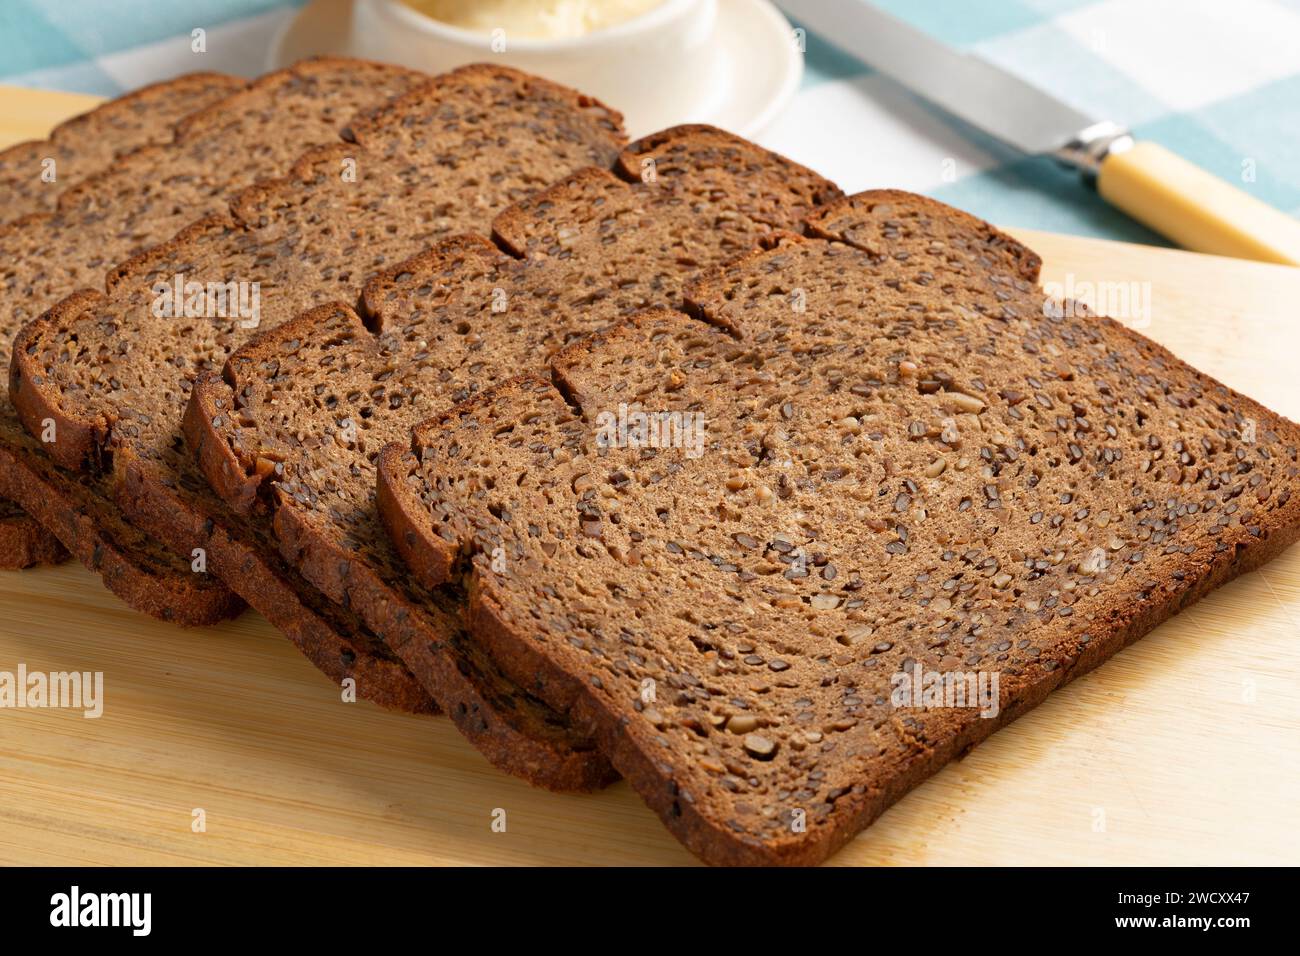 Thin slices of fresh baked brown linseed bread close up on a cutting board Stock Photo